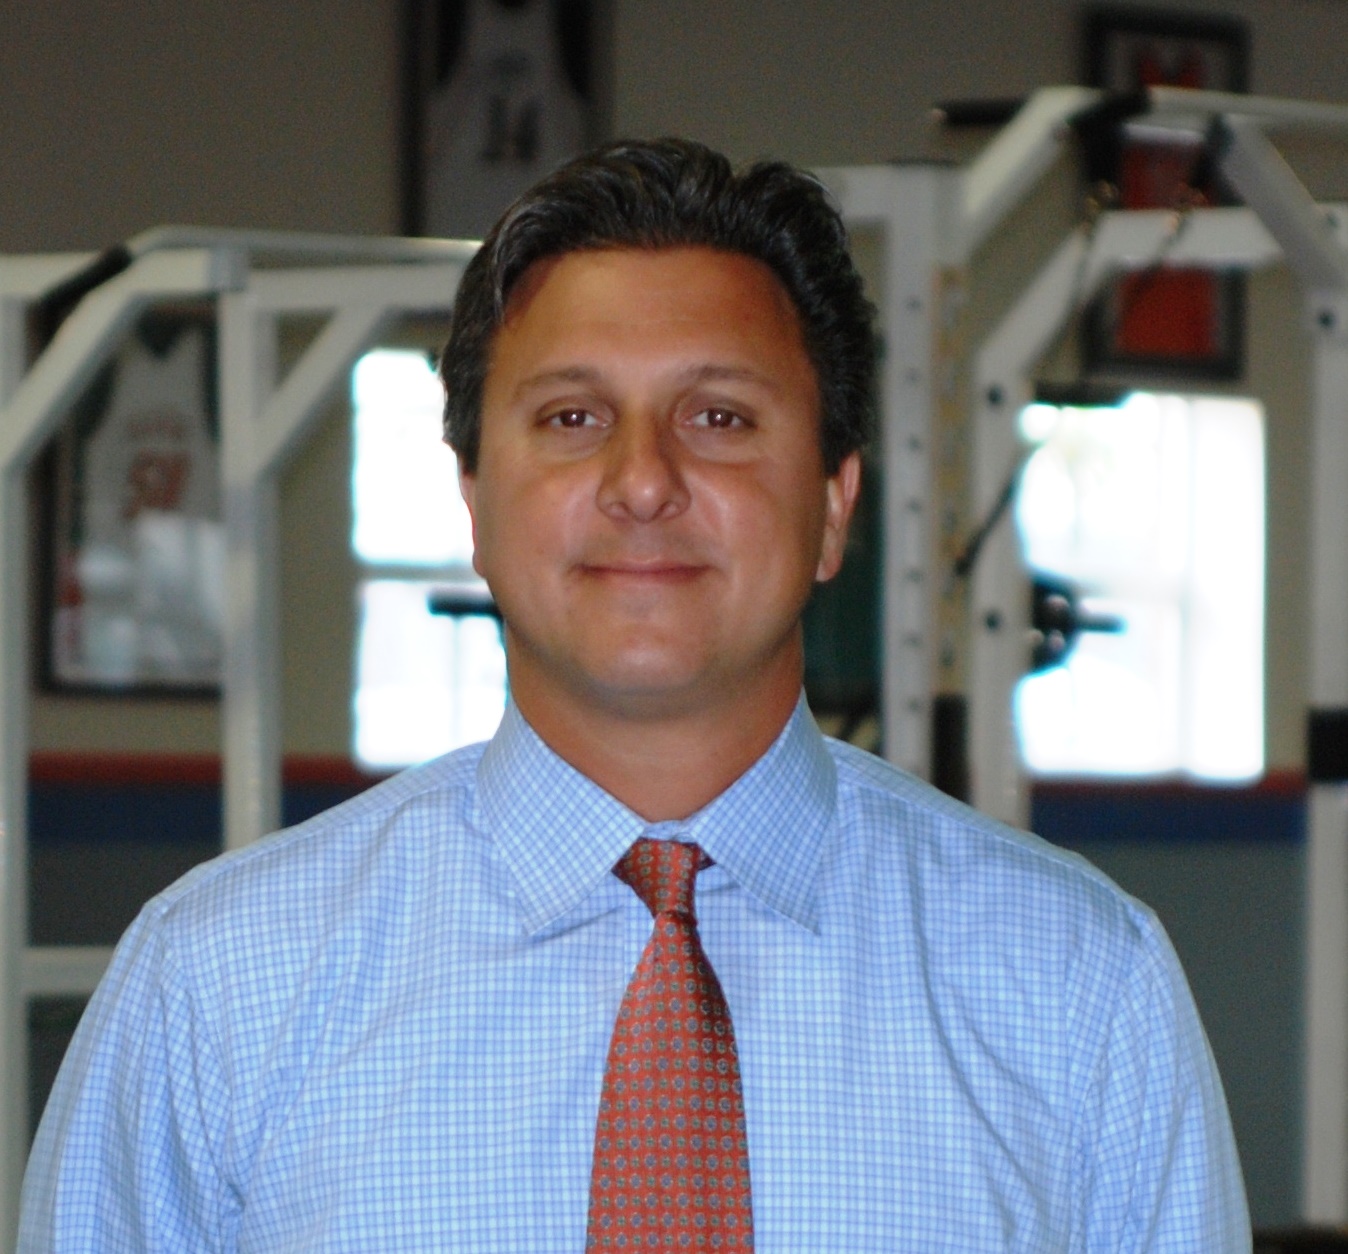 Tim Mauro, Partner and VP of Clinical Operations for Queens and Long Island at Professional Physical Therapy